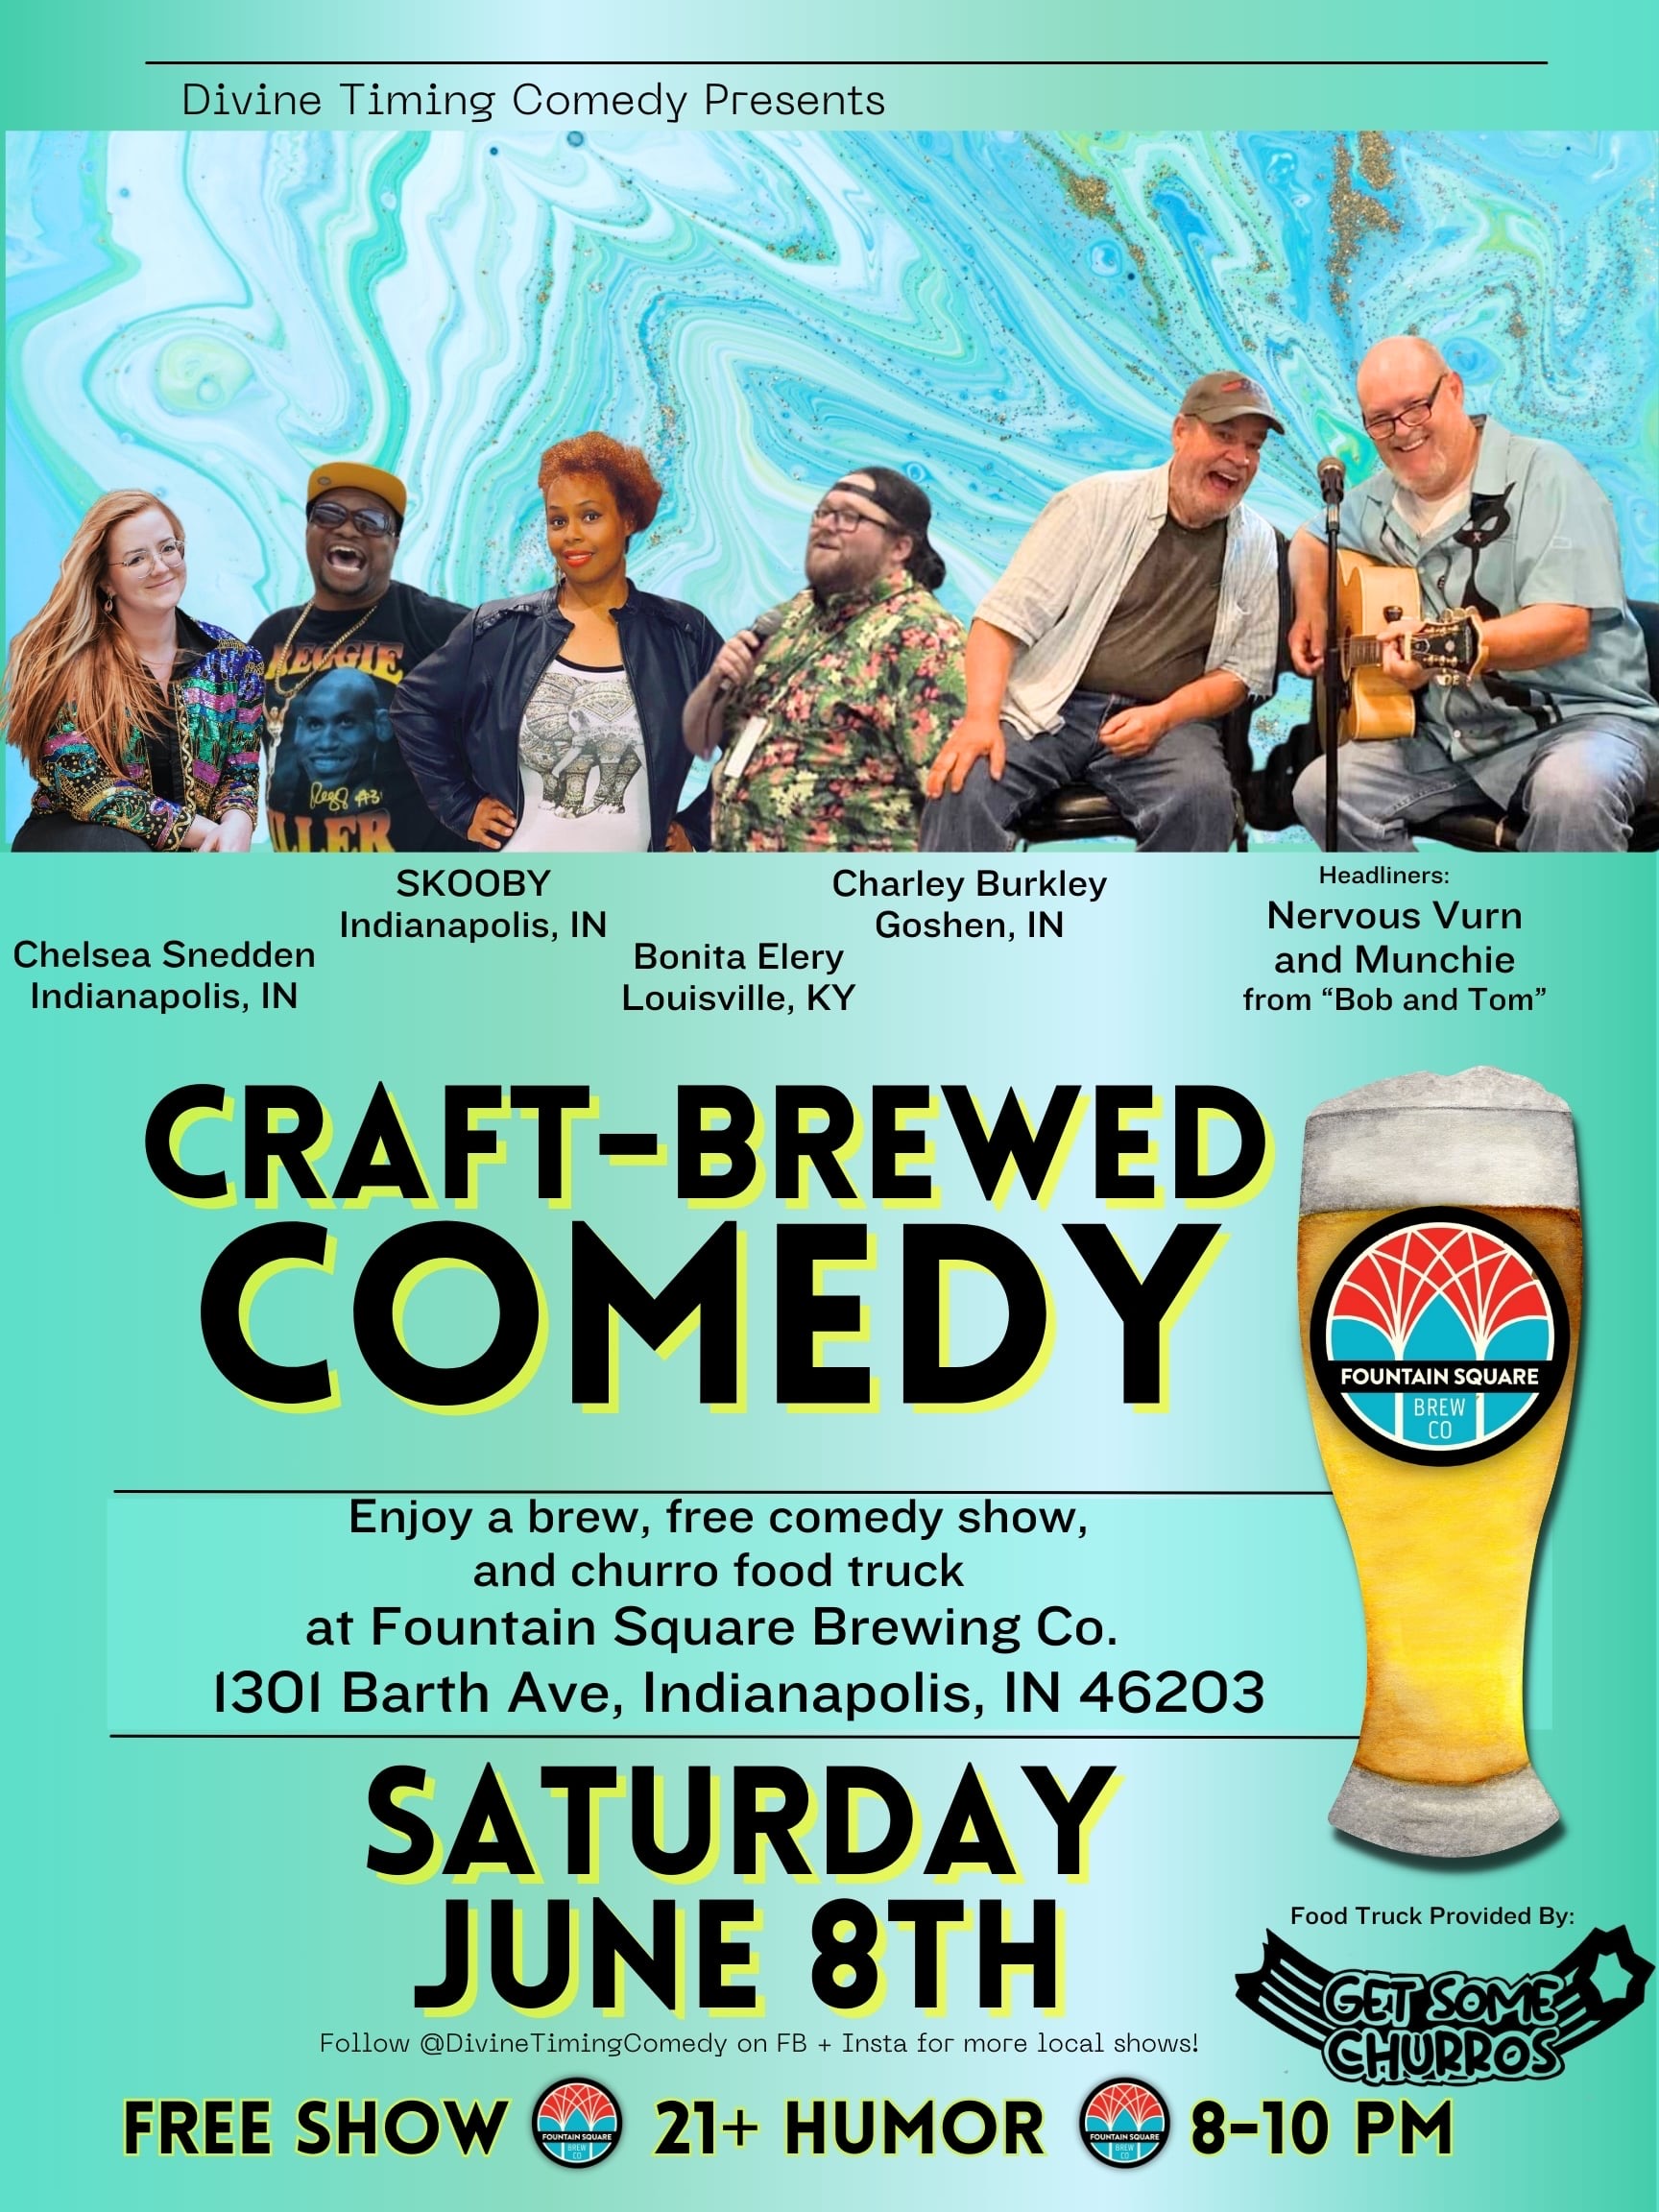 craft-brewed comedy show is at fountain square brewing on saturday, june 8 at 8 pm